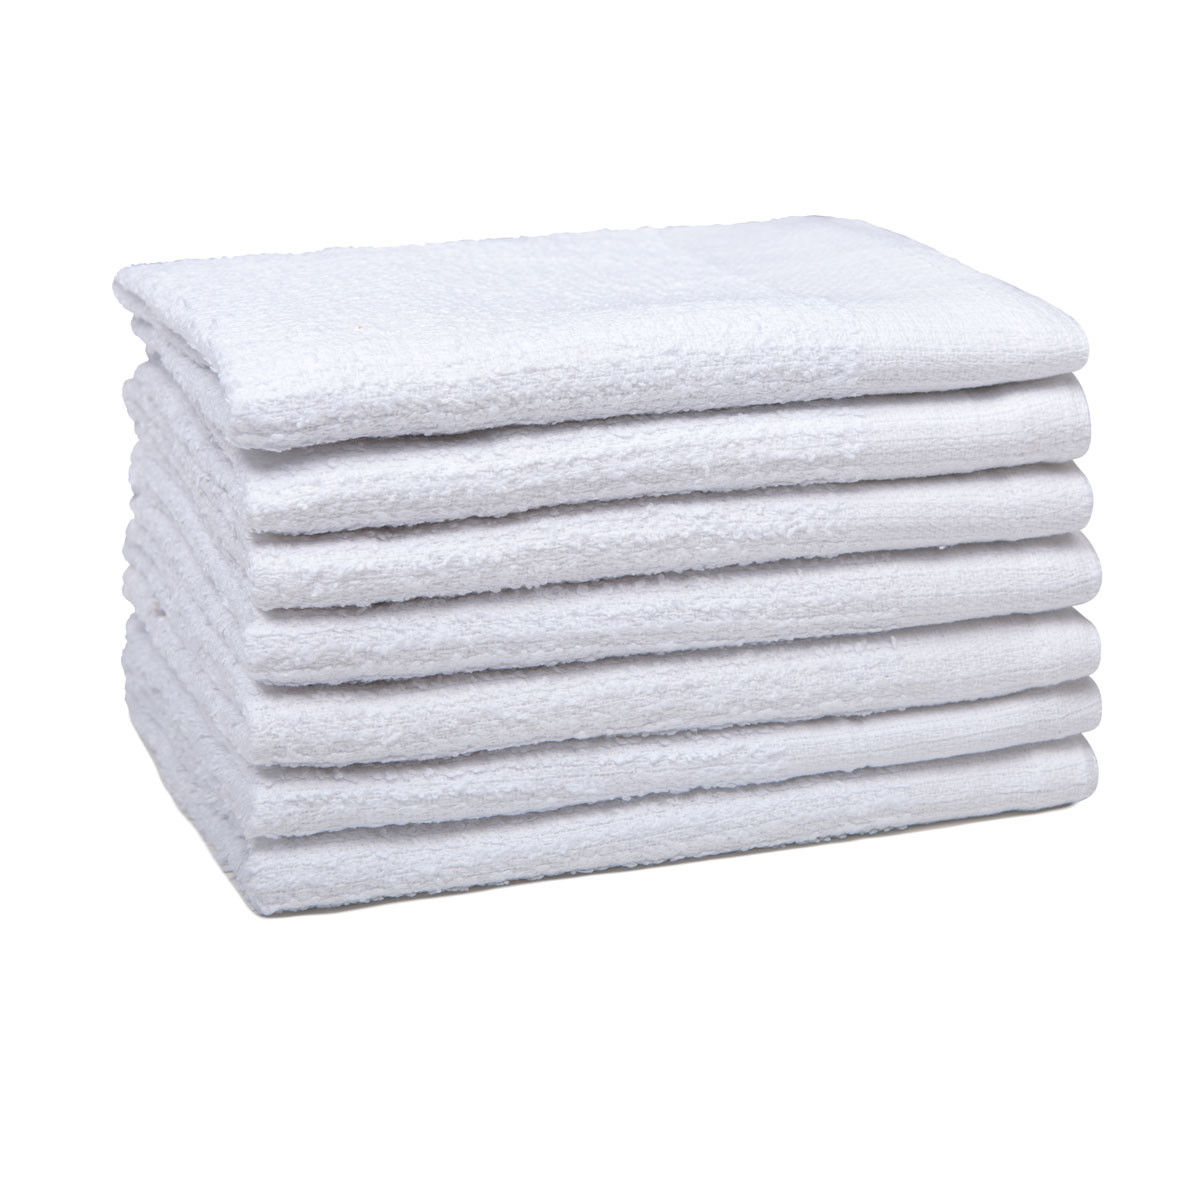 Wholesale Bar Mop Towels by Intralin Questions & Answers